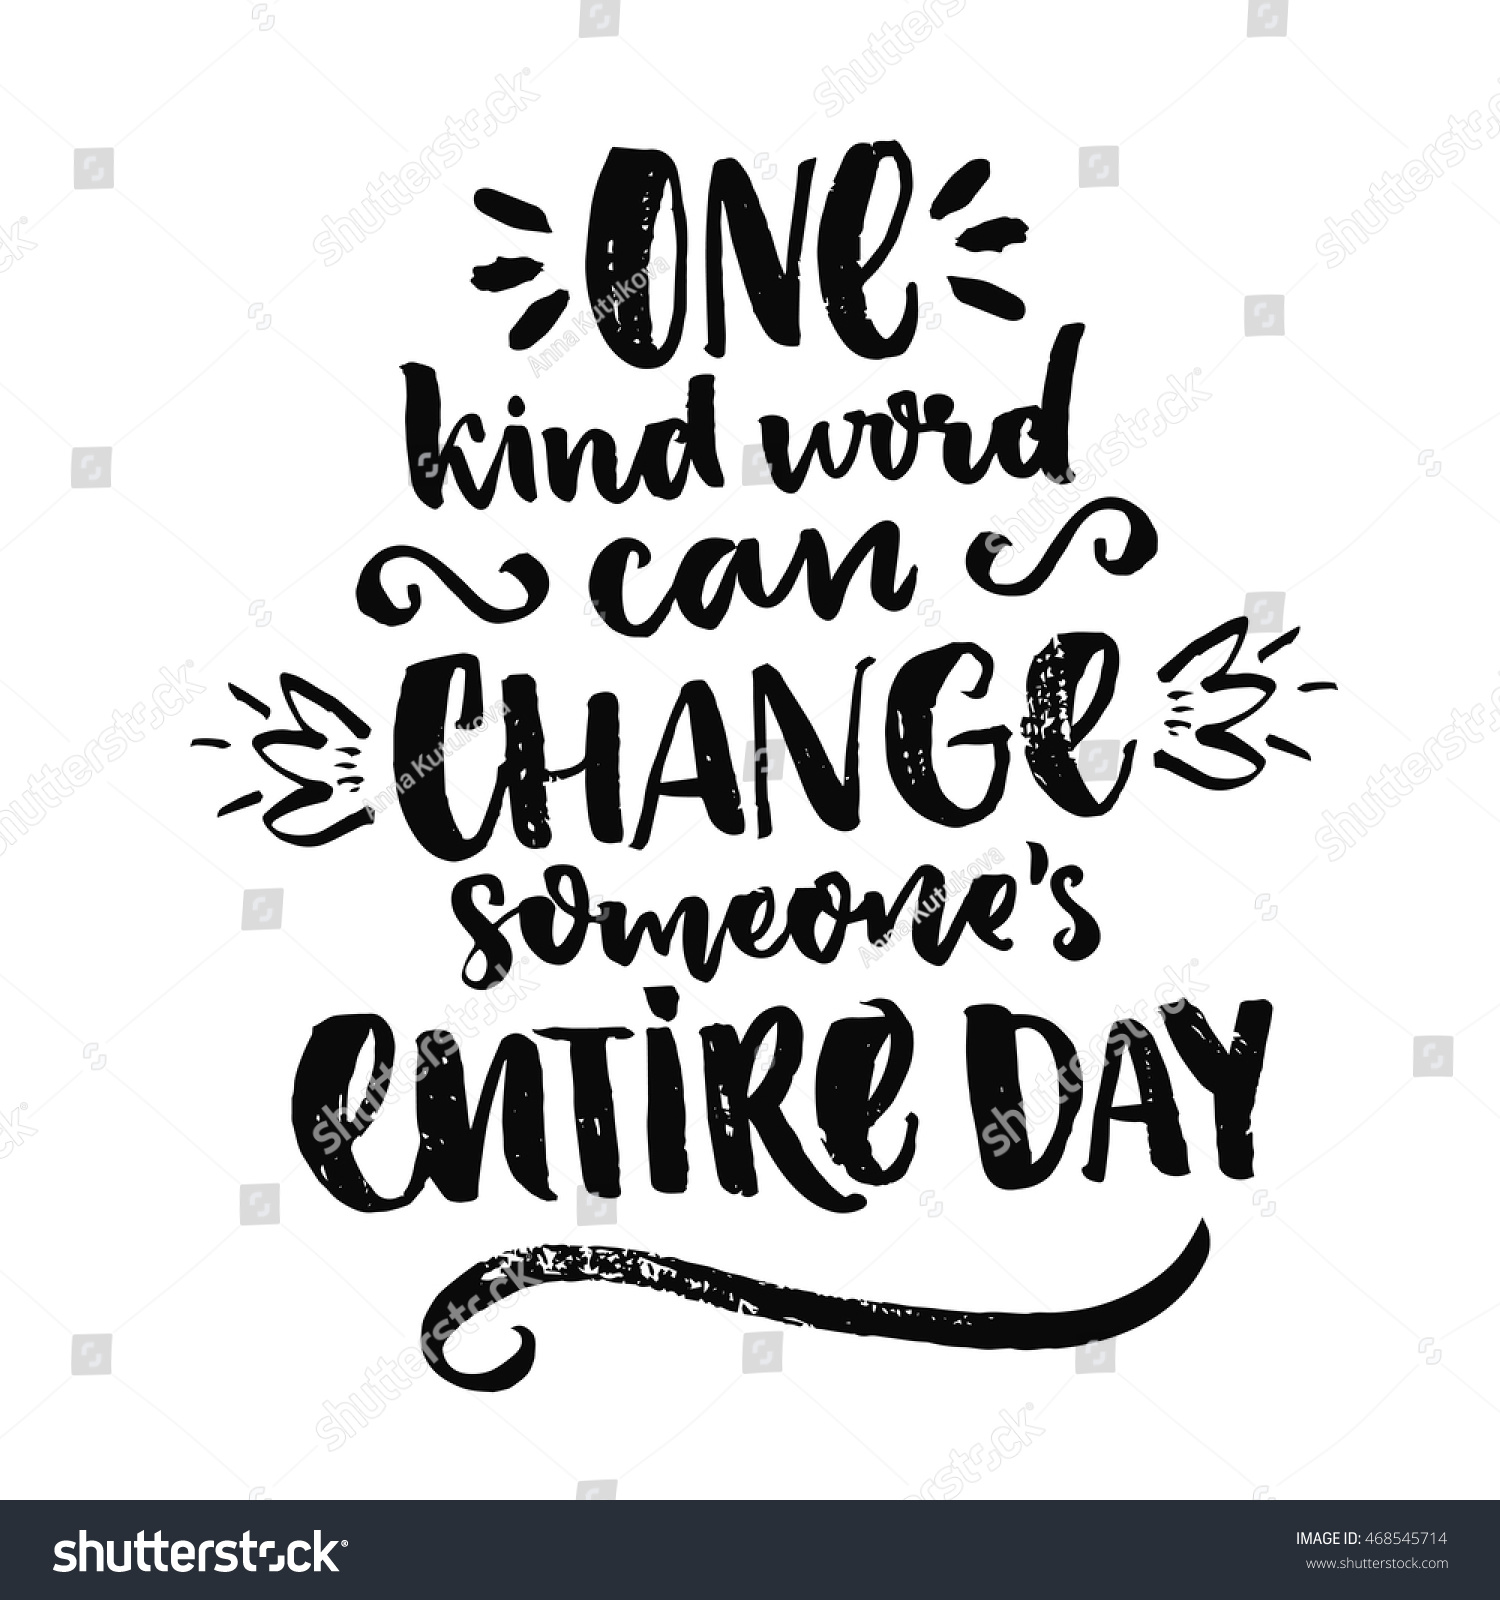 e kind word can change someone s entire day Inspiration quote about love and kindness